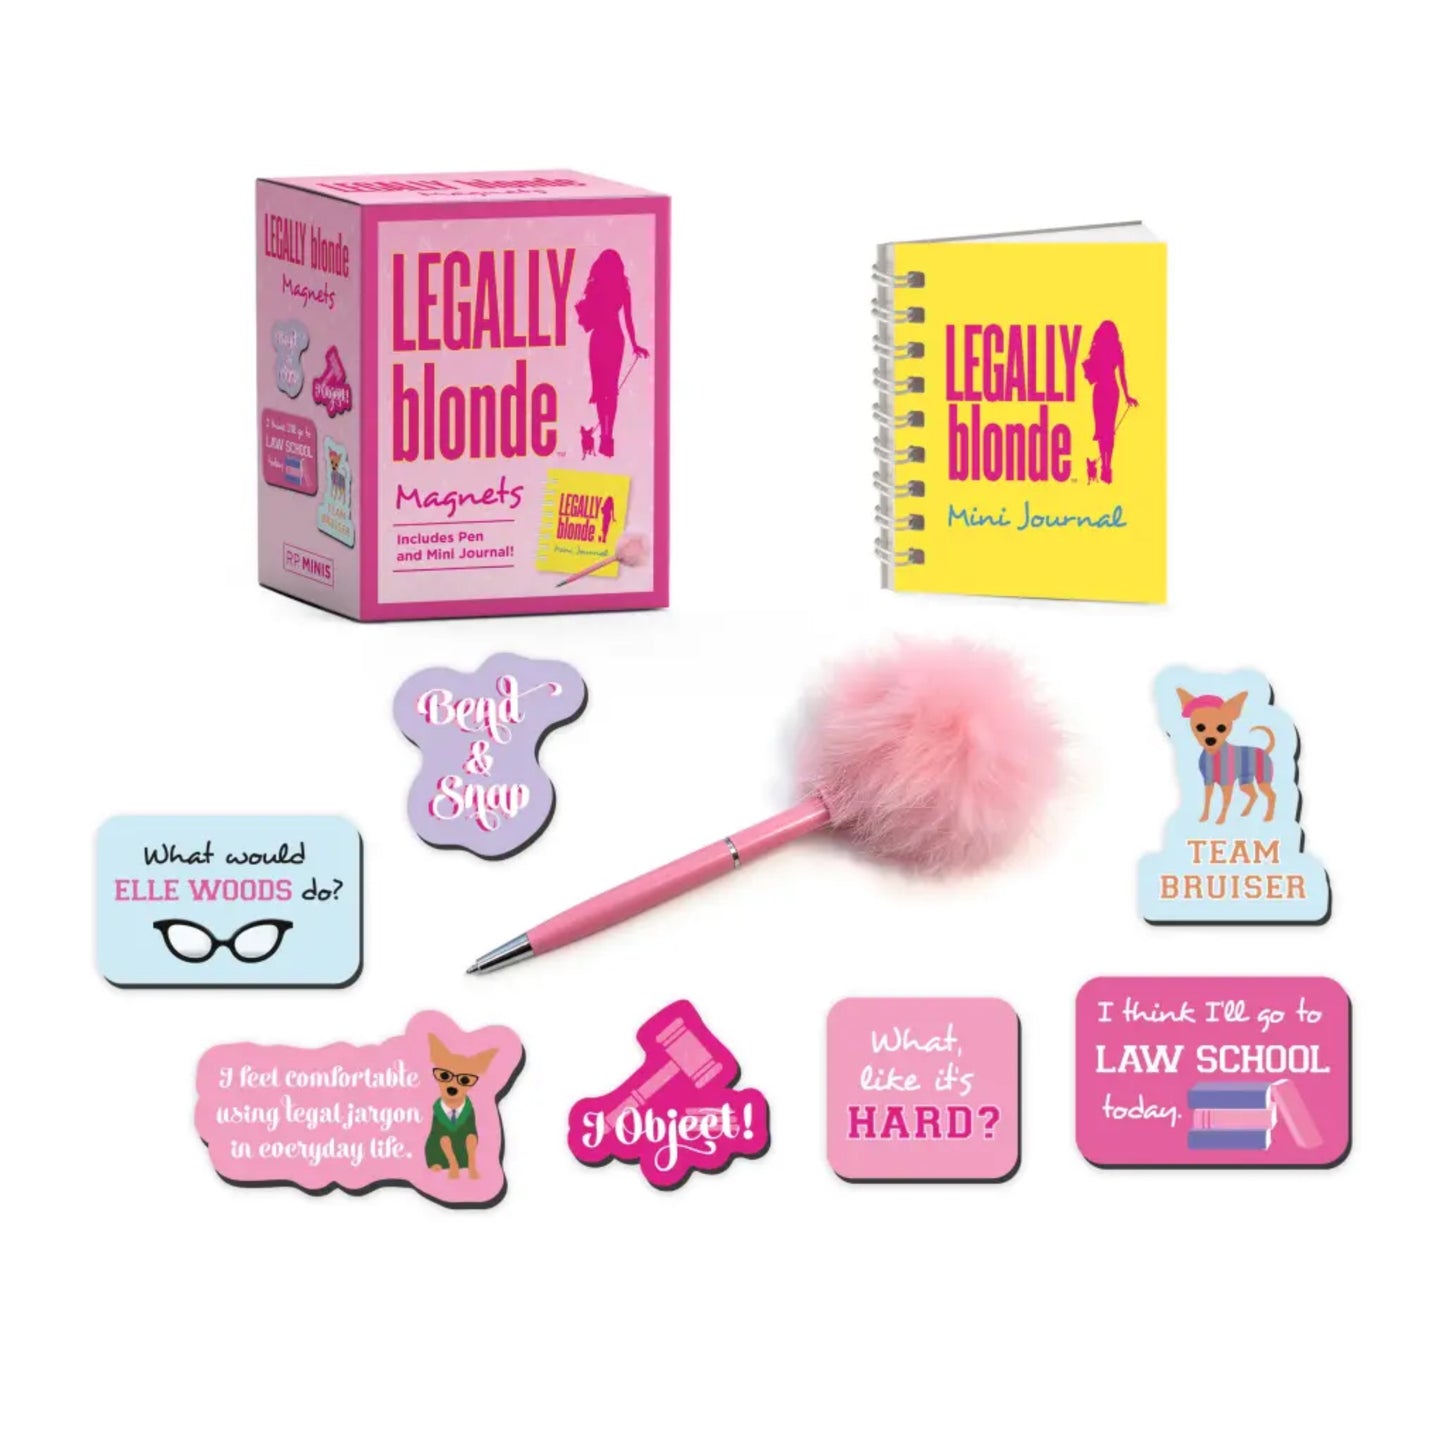 Legally Blonde Magnets: Includes Pen and Mini Journal